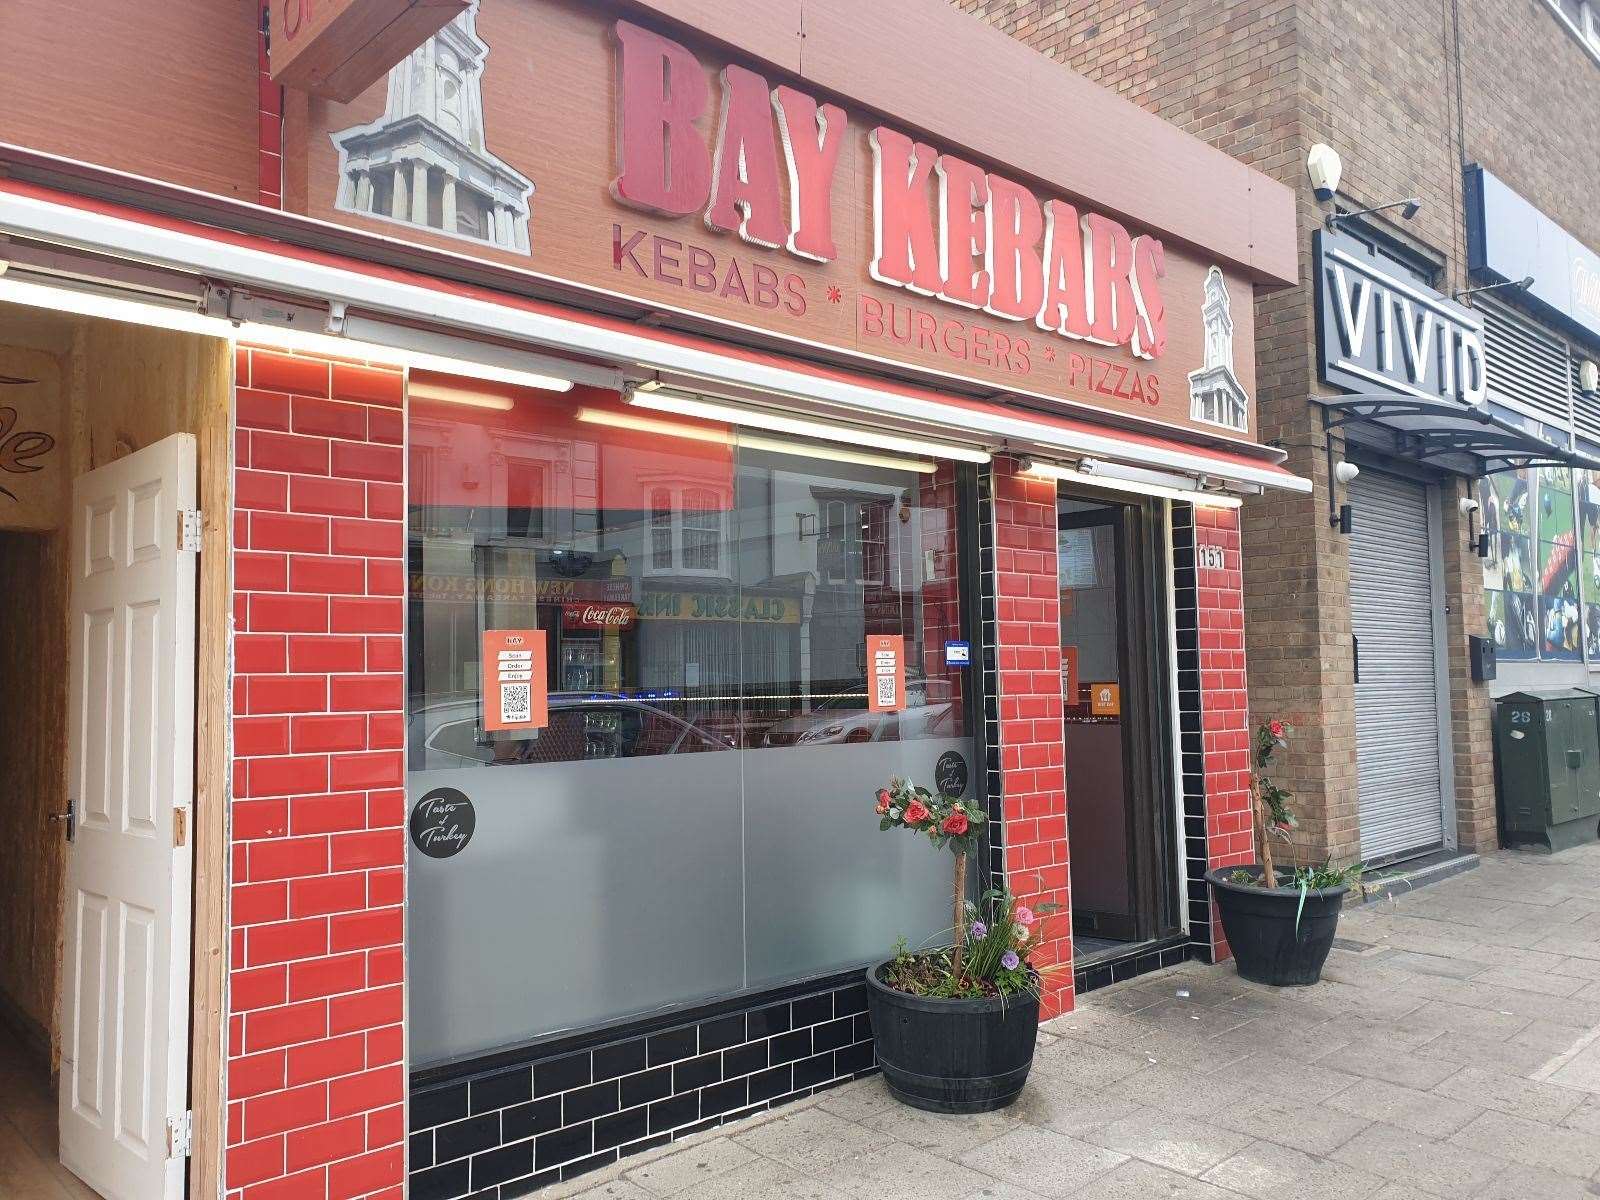 Bay Kebabs and Burgers in Herne Bay High Street gets one-star hygiene rating